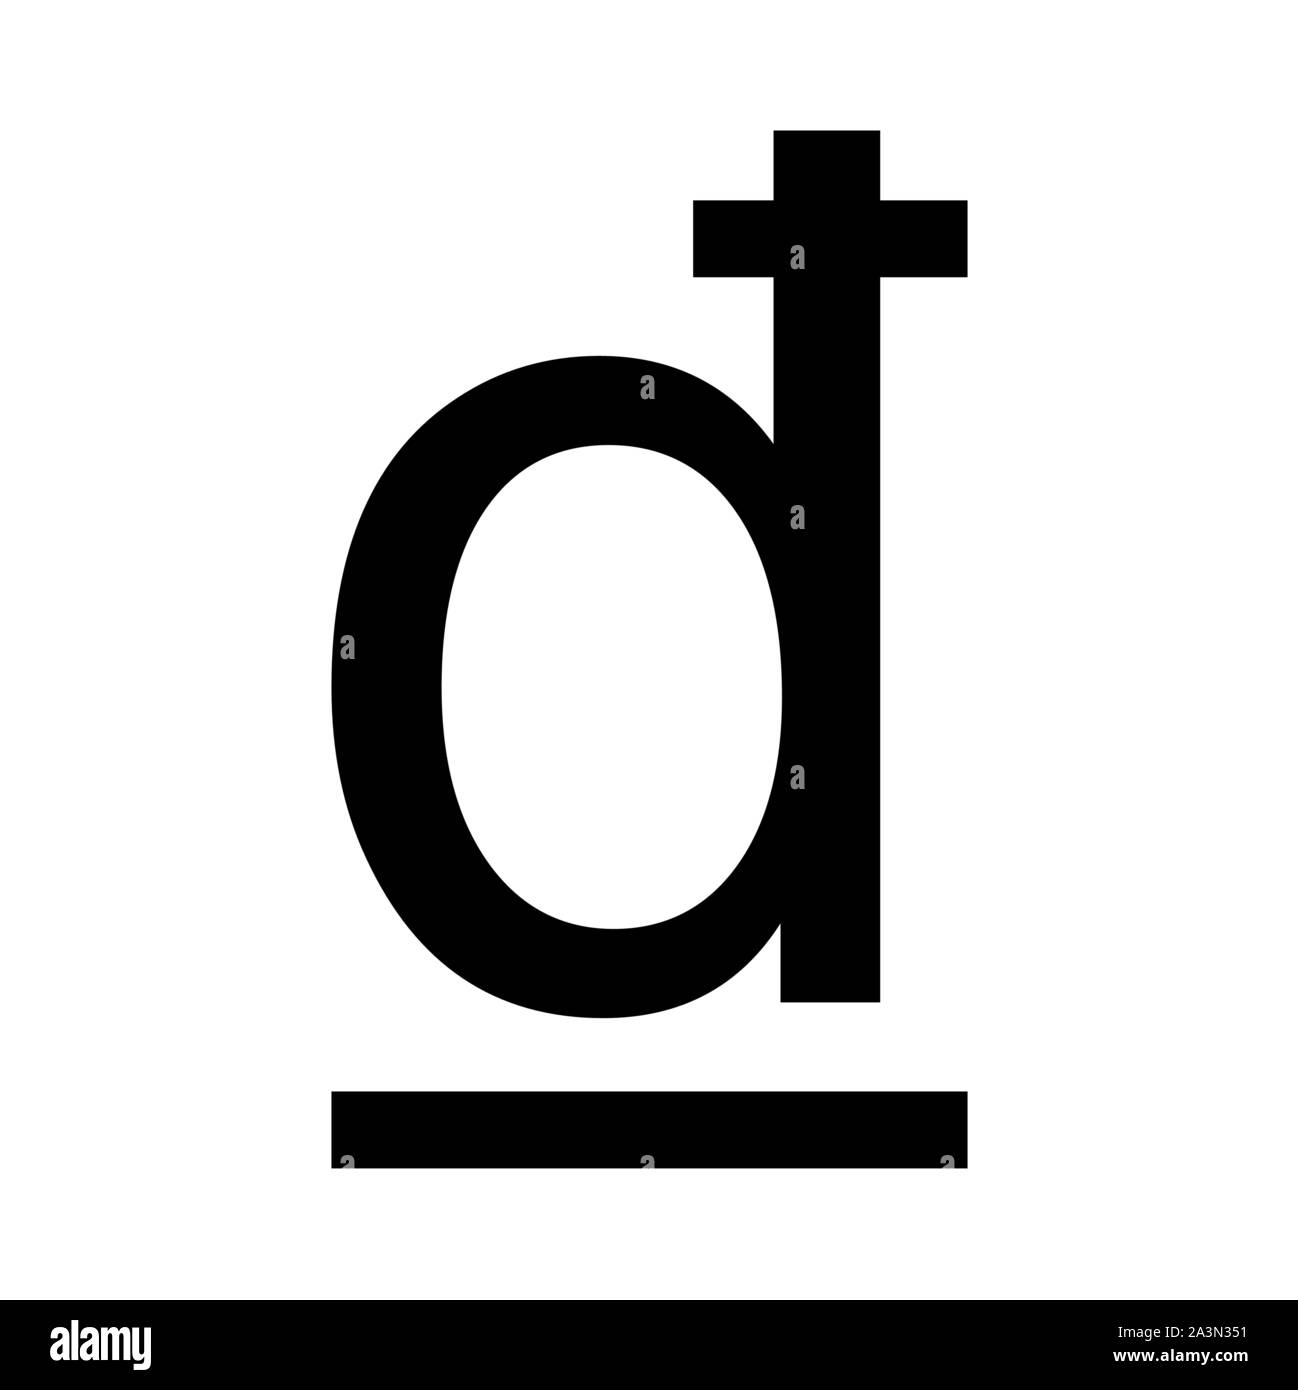 Dong currency symbol Stock Vector